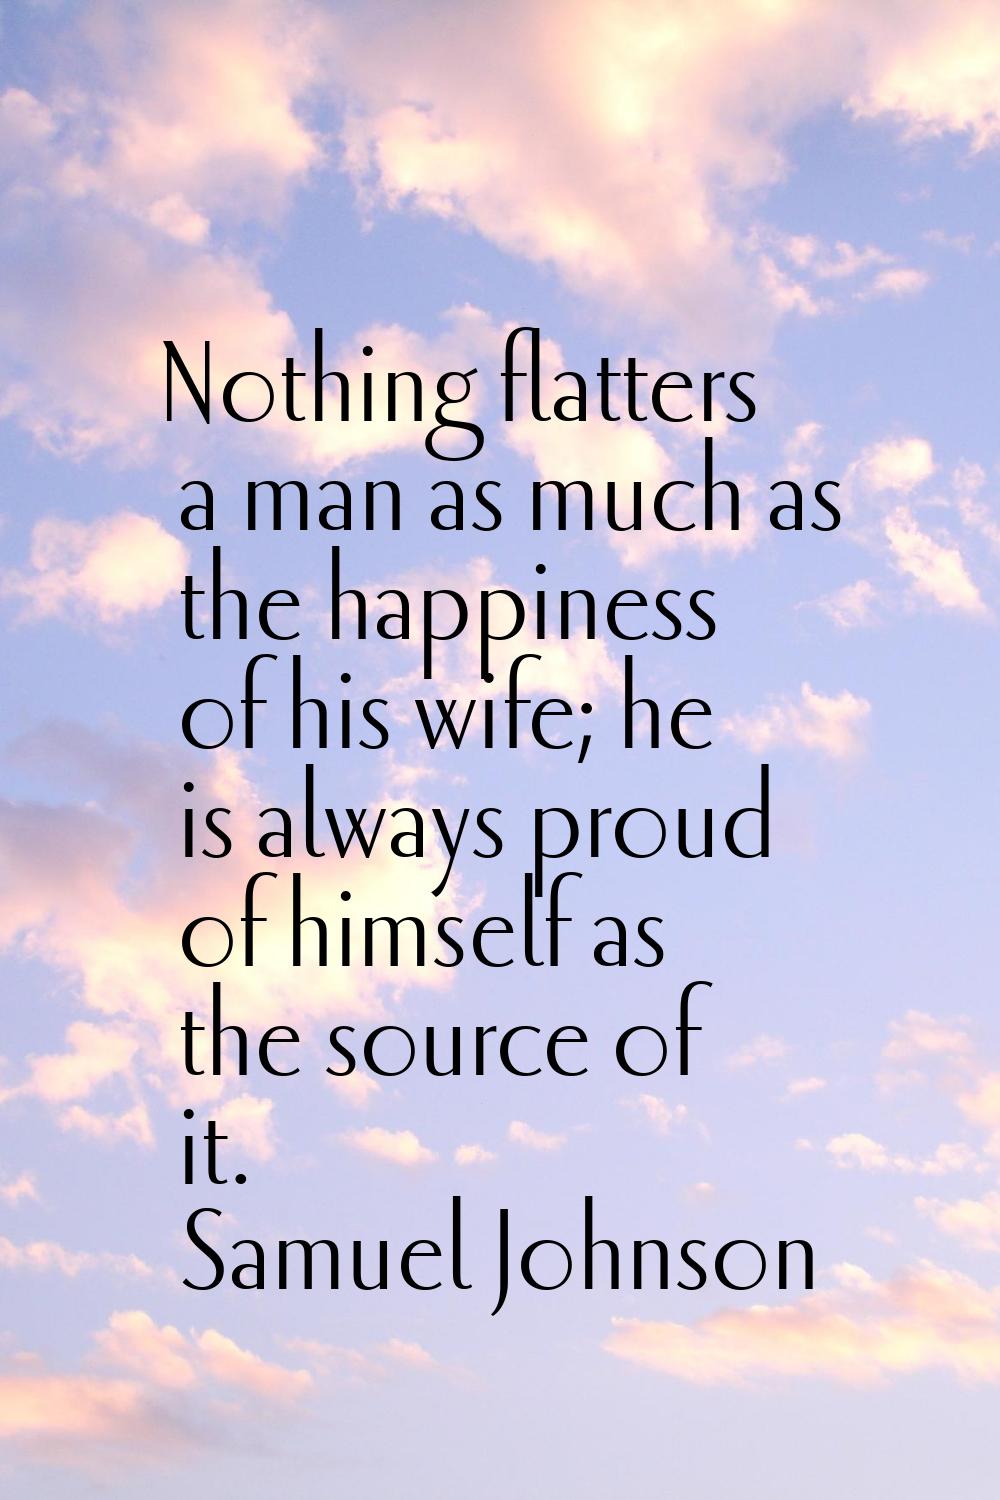 Nothing flatters a man as much as the happiness of his wife; he is always proud of himself as the s